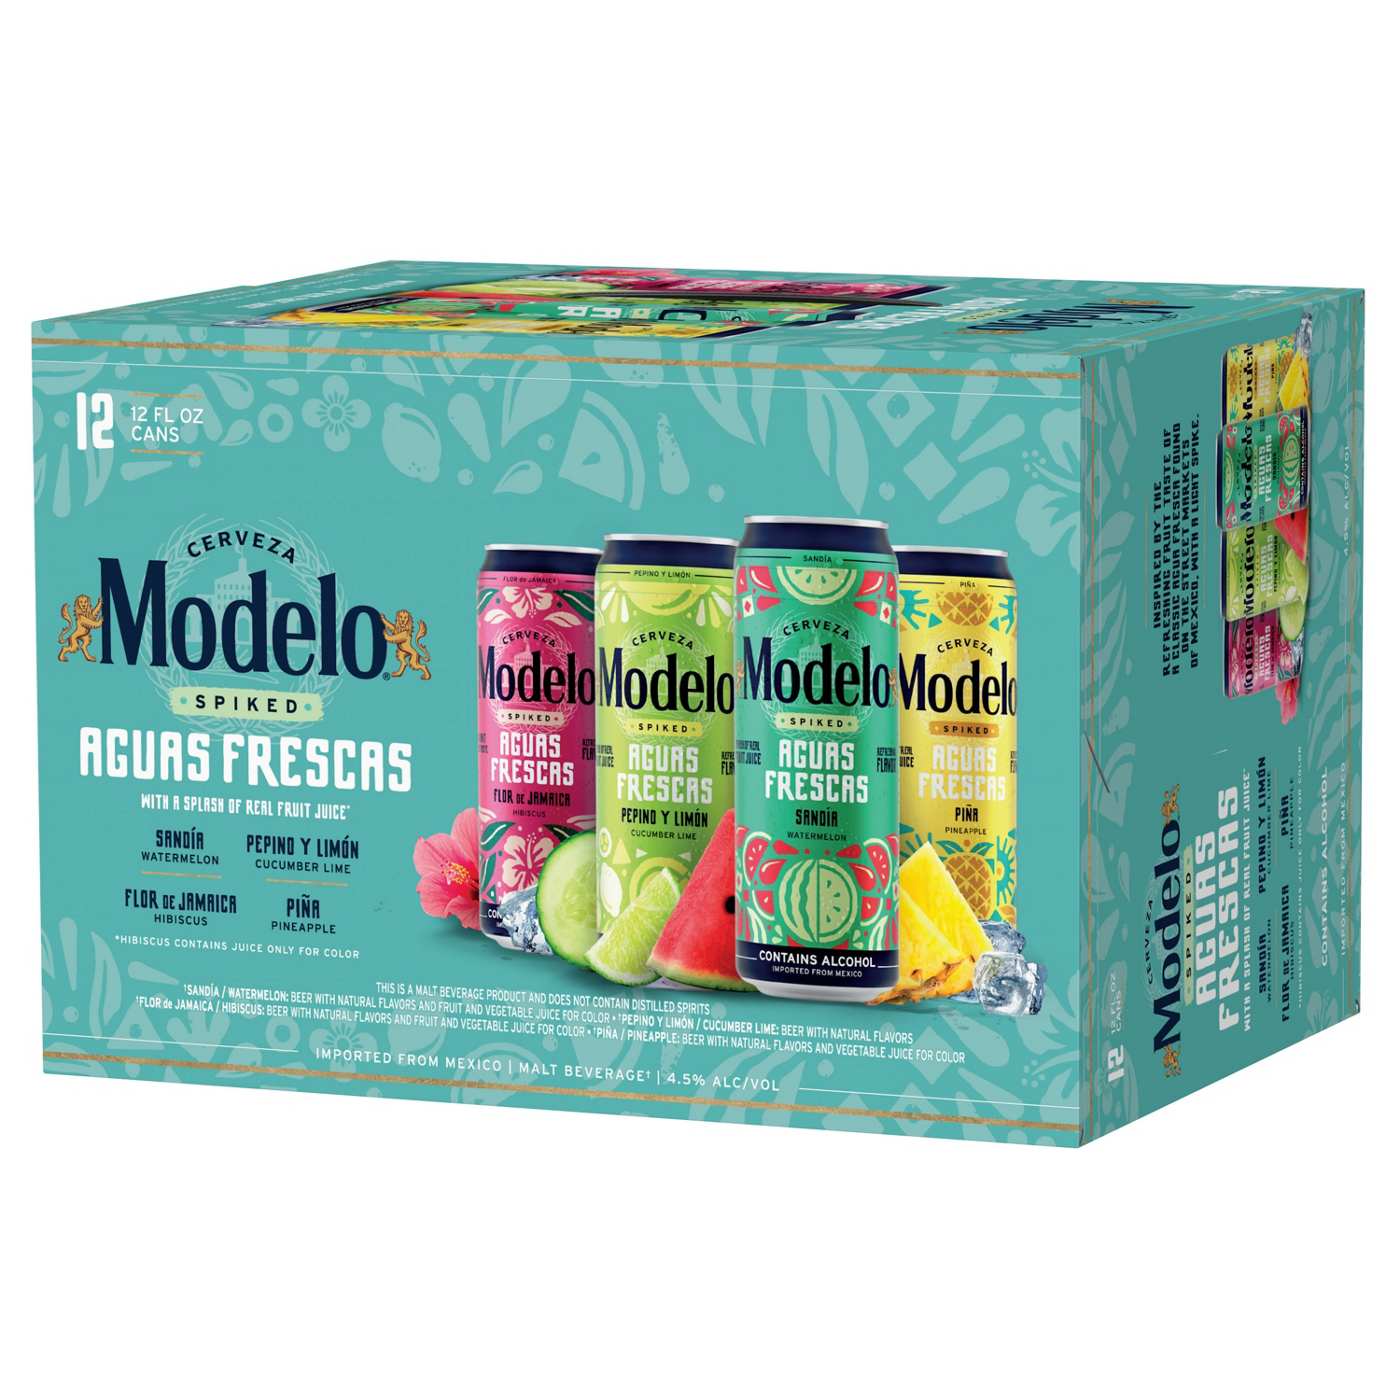 Modelo Spiked Aguas Frescas Spiked Frescas Variety Pack 12 pk Cans; image 4 of 8